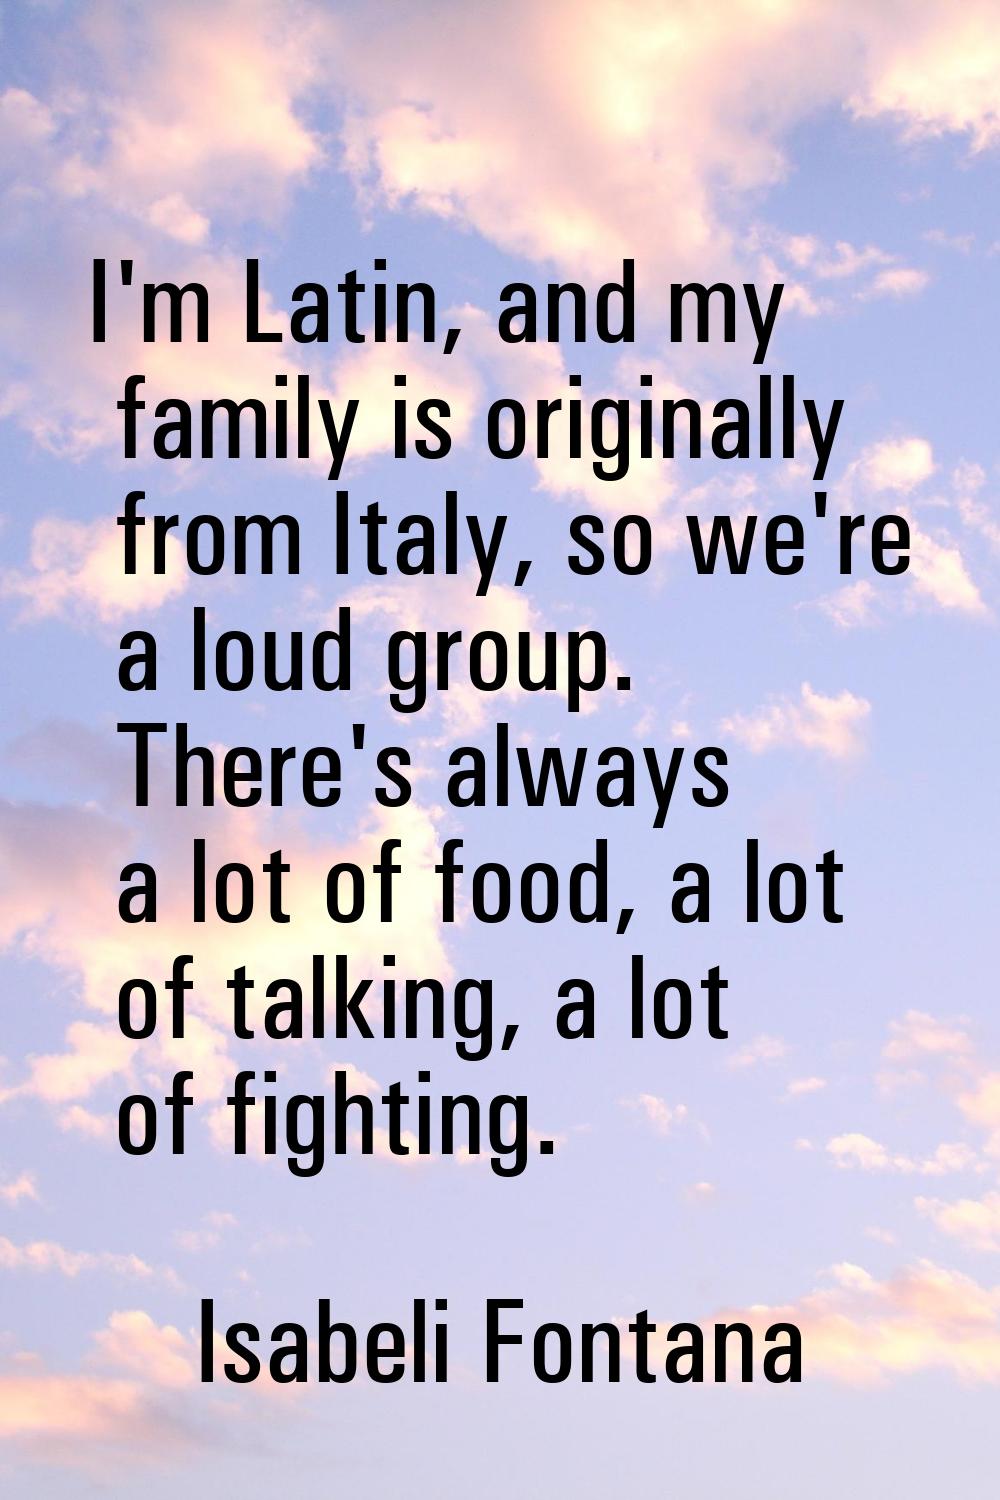 I'm Latin, and my family is originally from Italy, so we're a loud group. There's always a lot of f